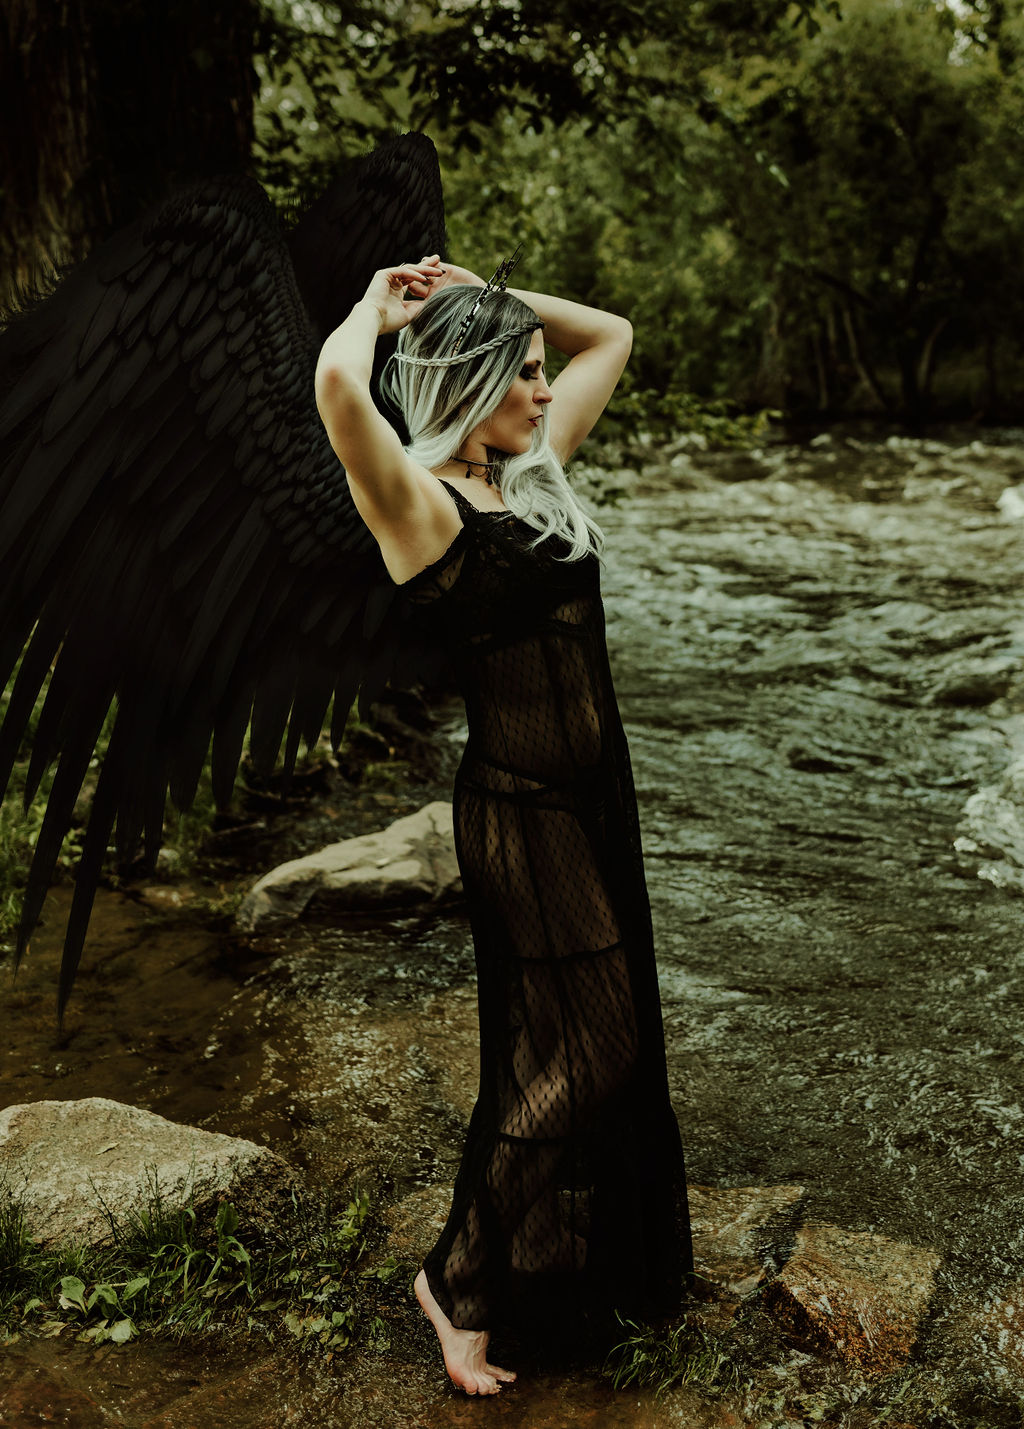 A woman stands in a forest with a river in the background. Her arms are raised above her head. The woman has a pair of large black wings attached to her back